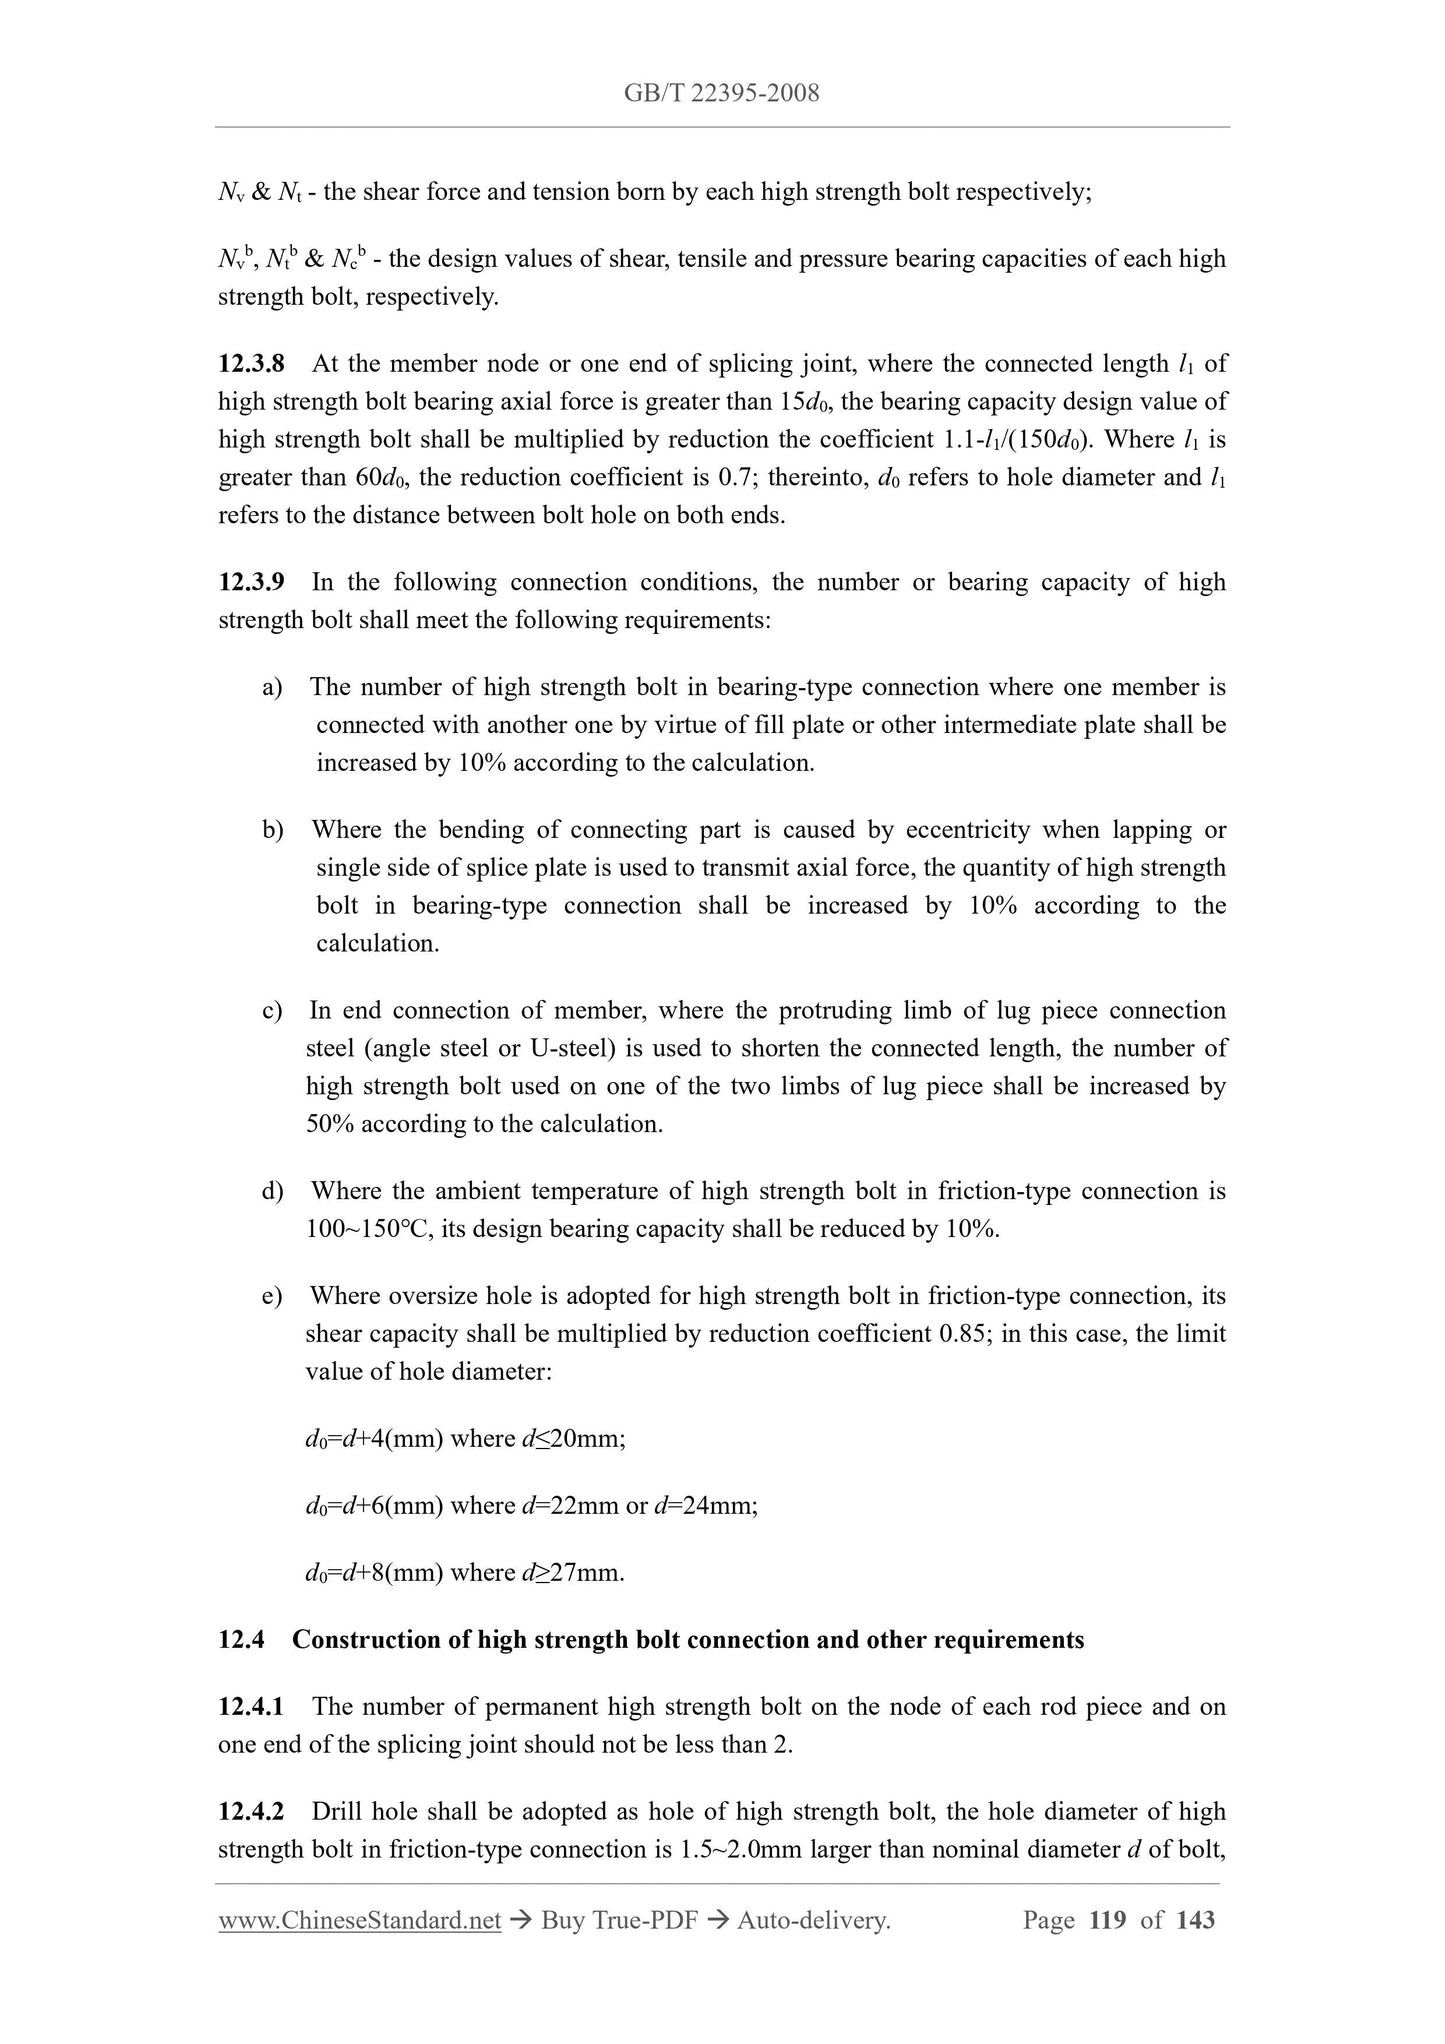 GB/T 22395-2008 Page 11